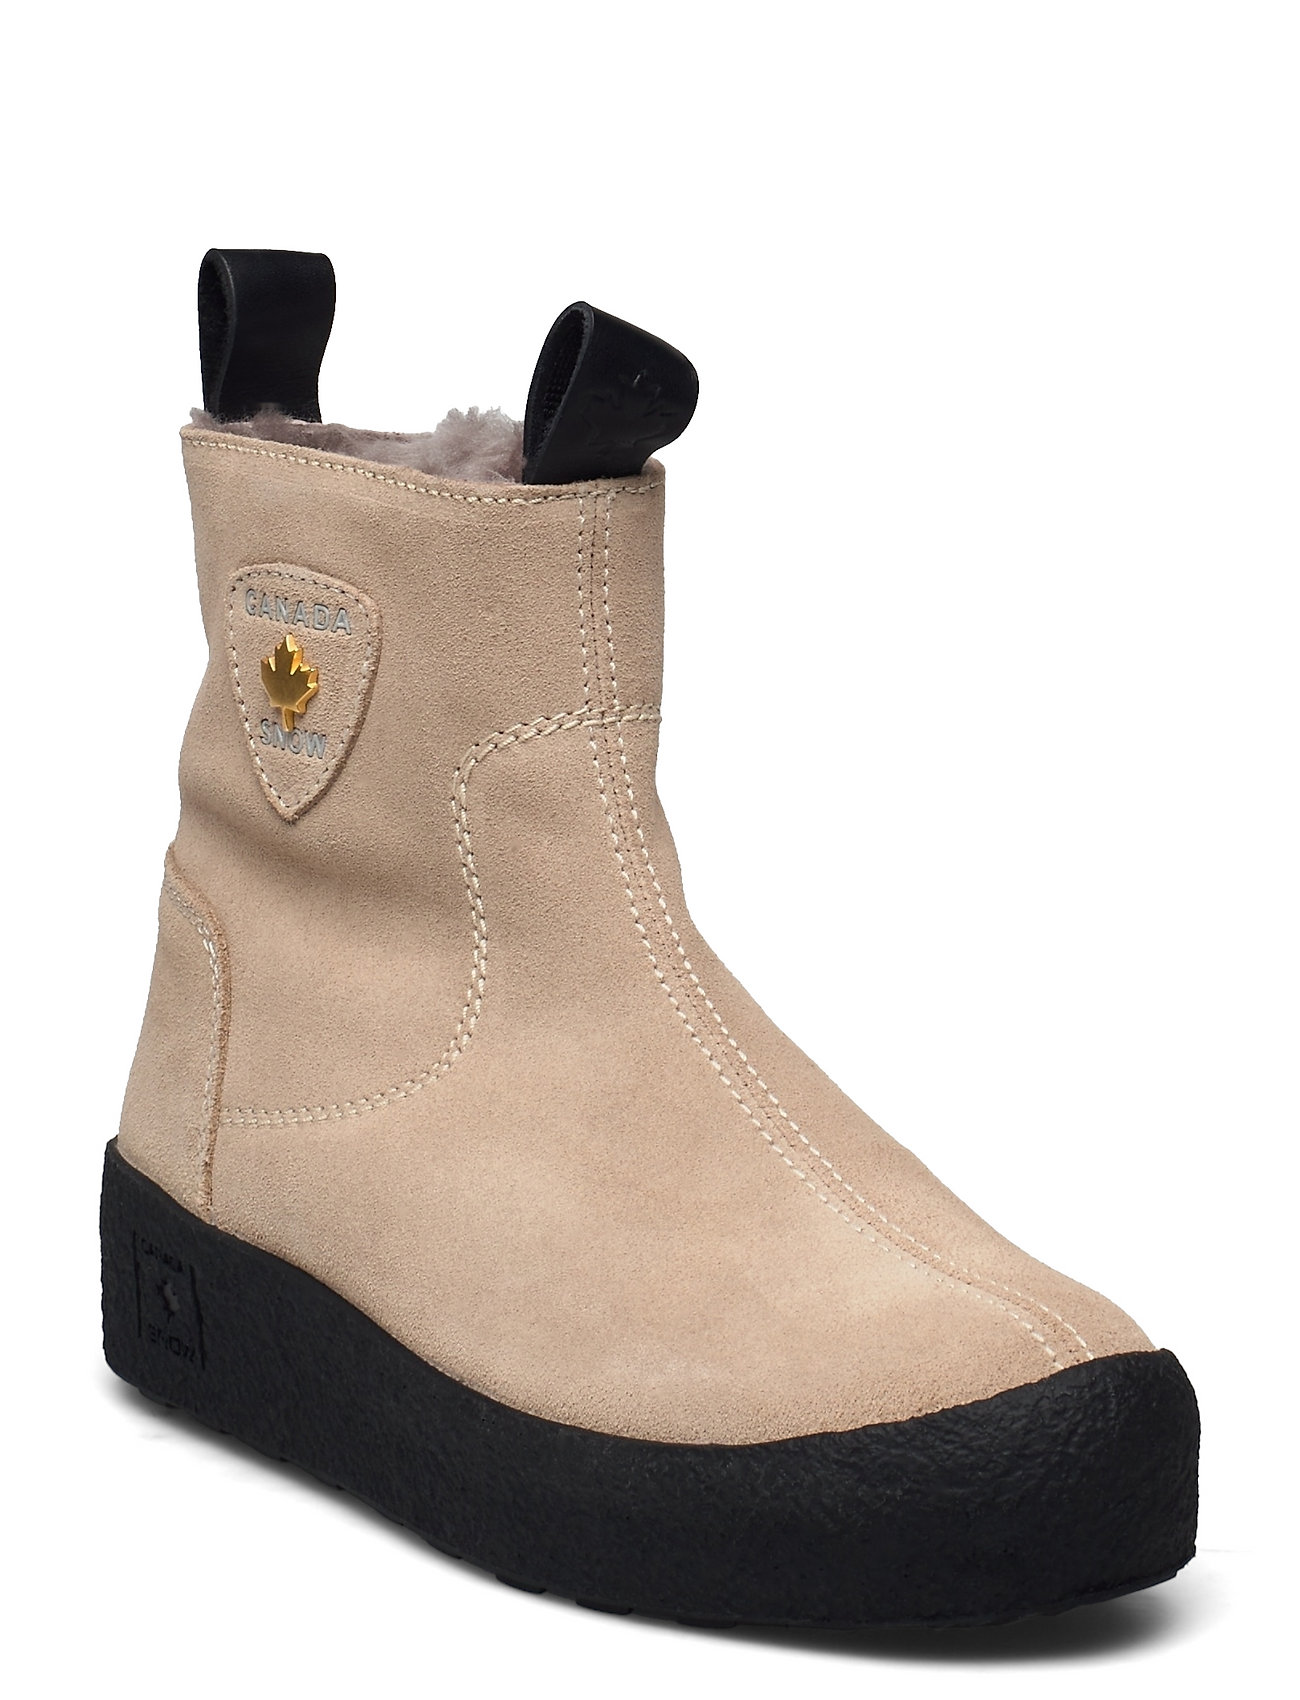 Quebec Shoes Boots Ankle Boots Ankle Boot - Flat Beige Canada Snow